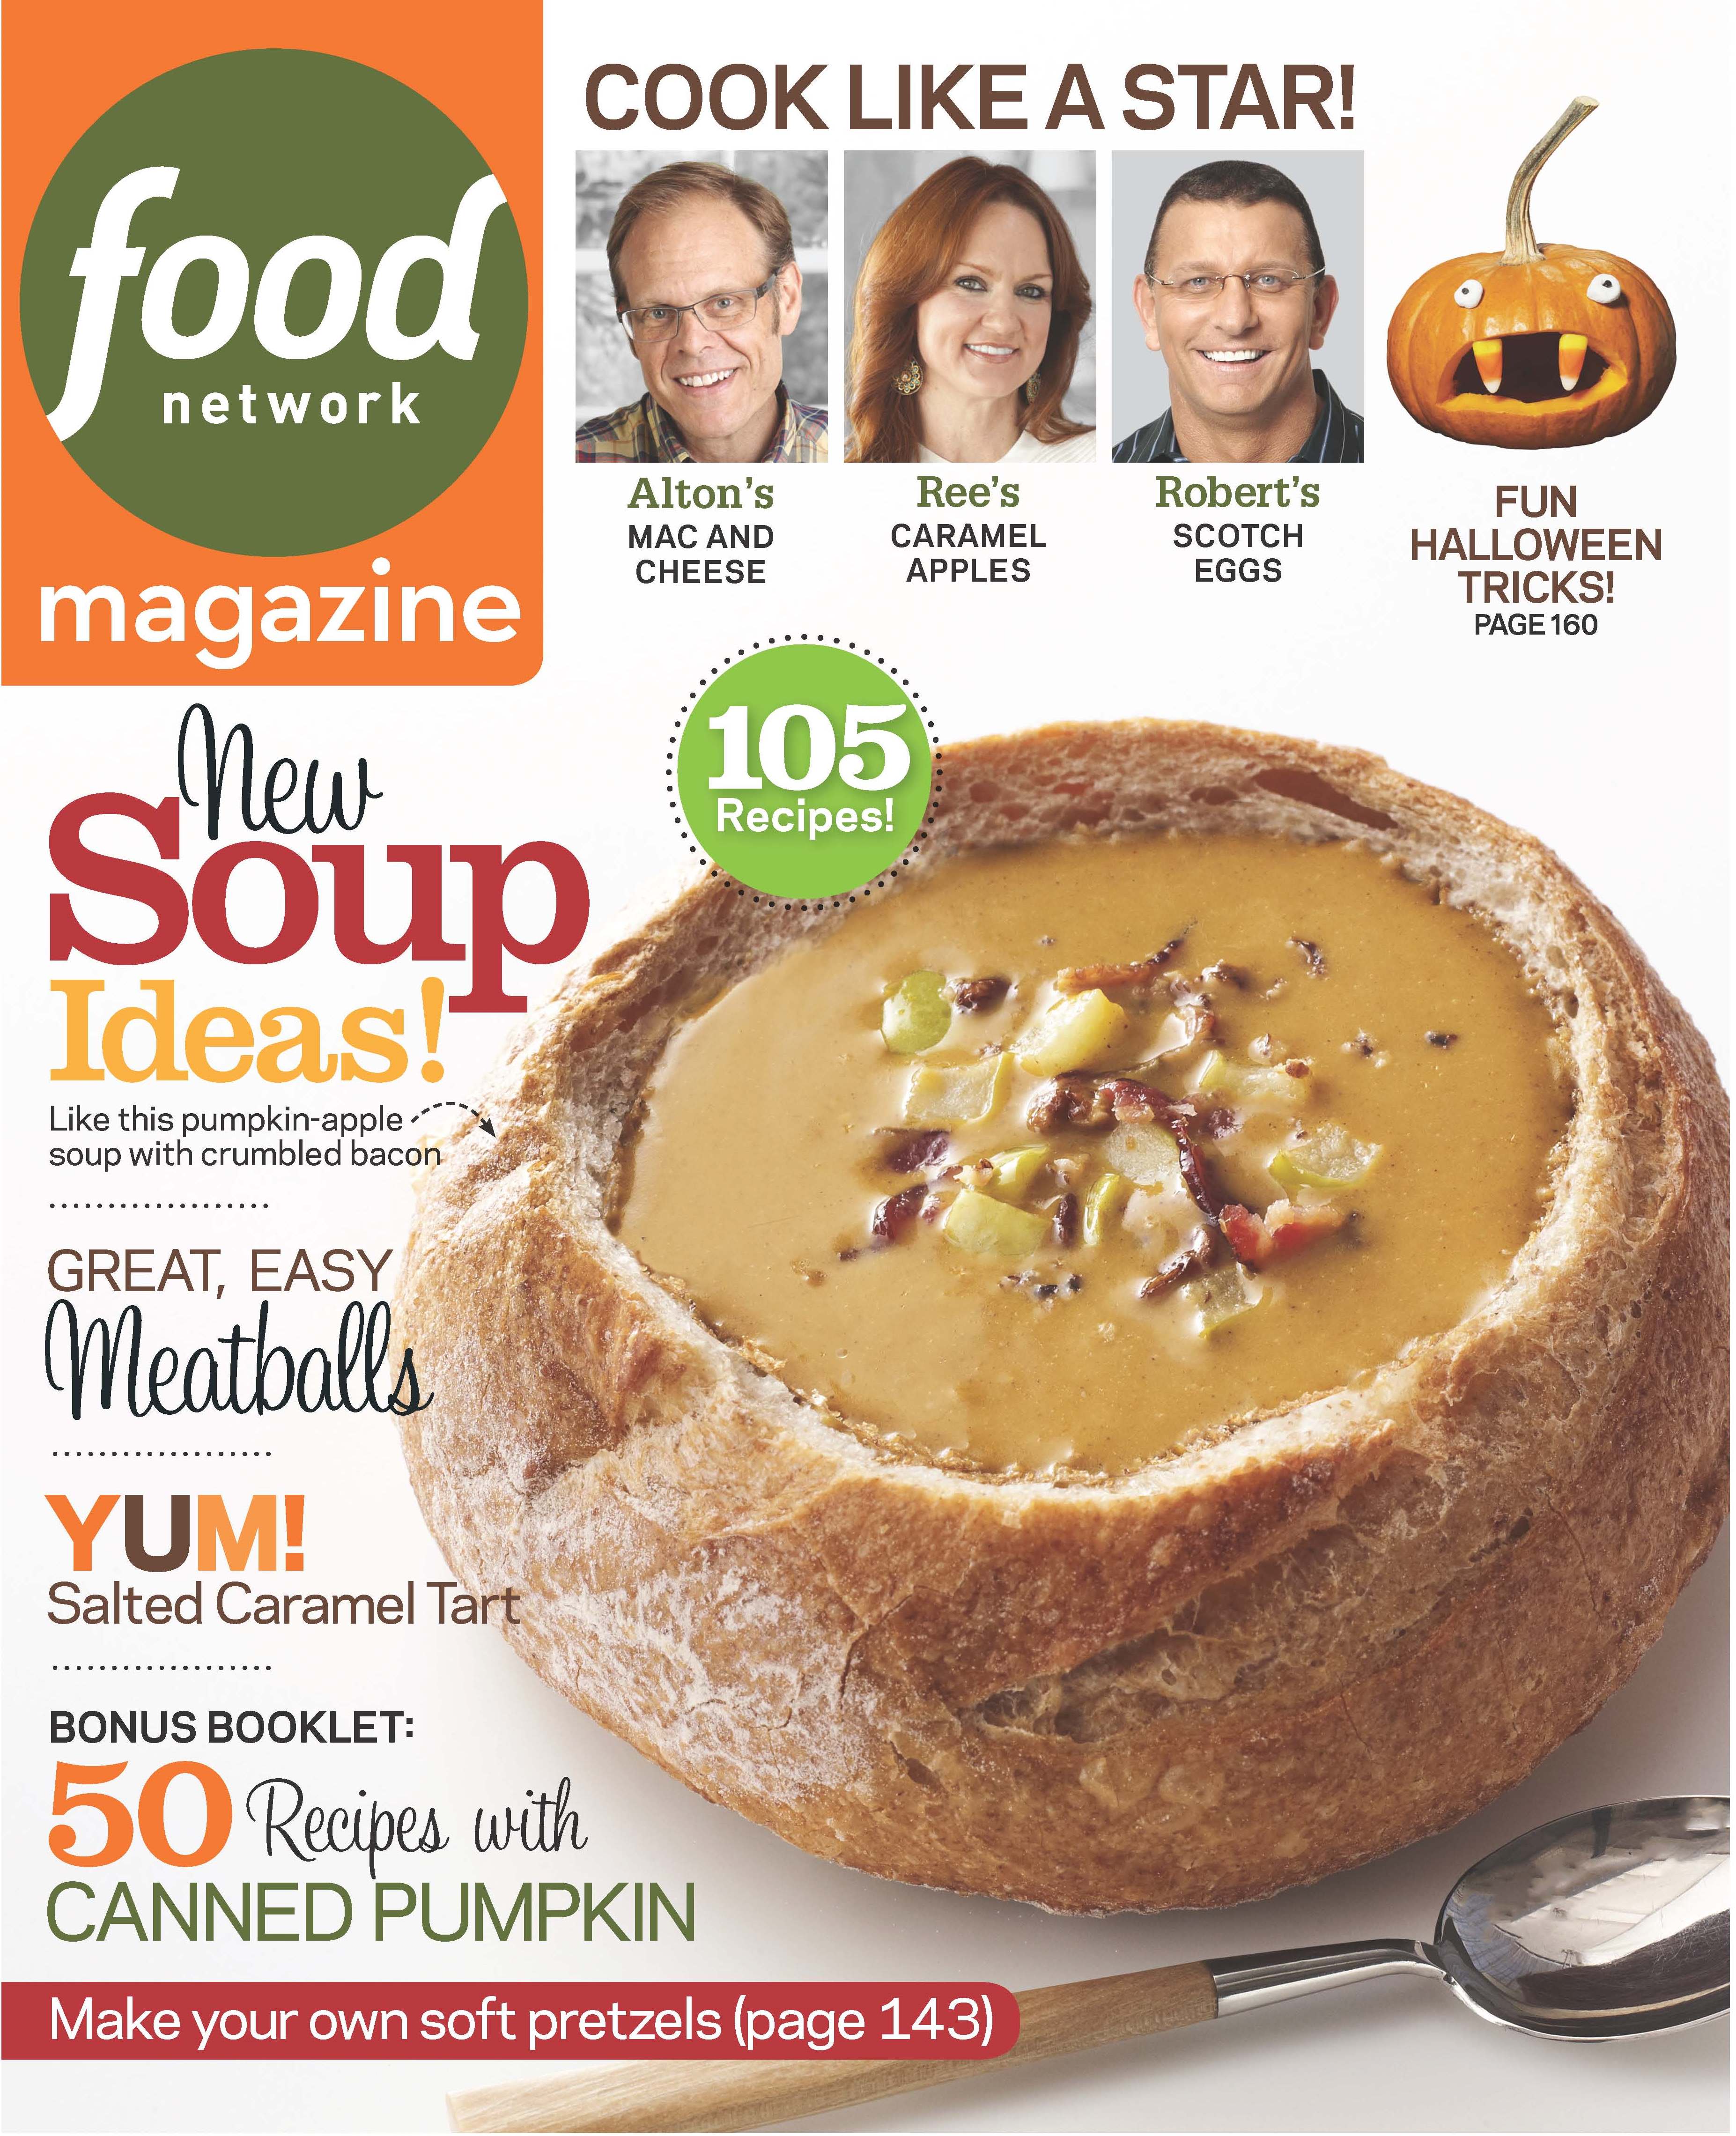 Food Network Mag Cover Oct '13 (2)